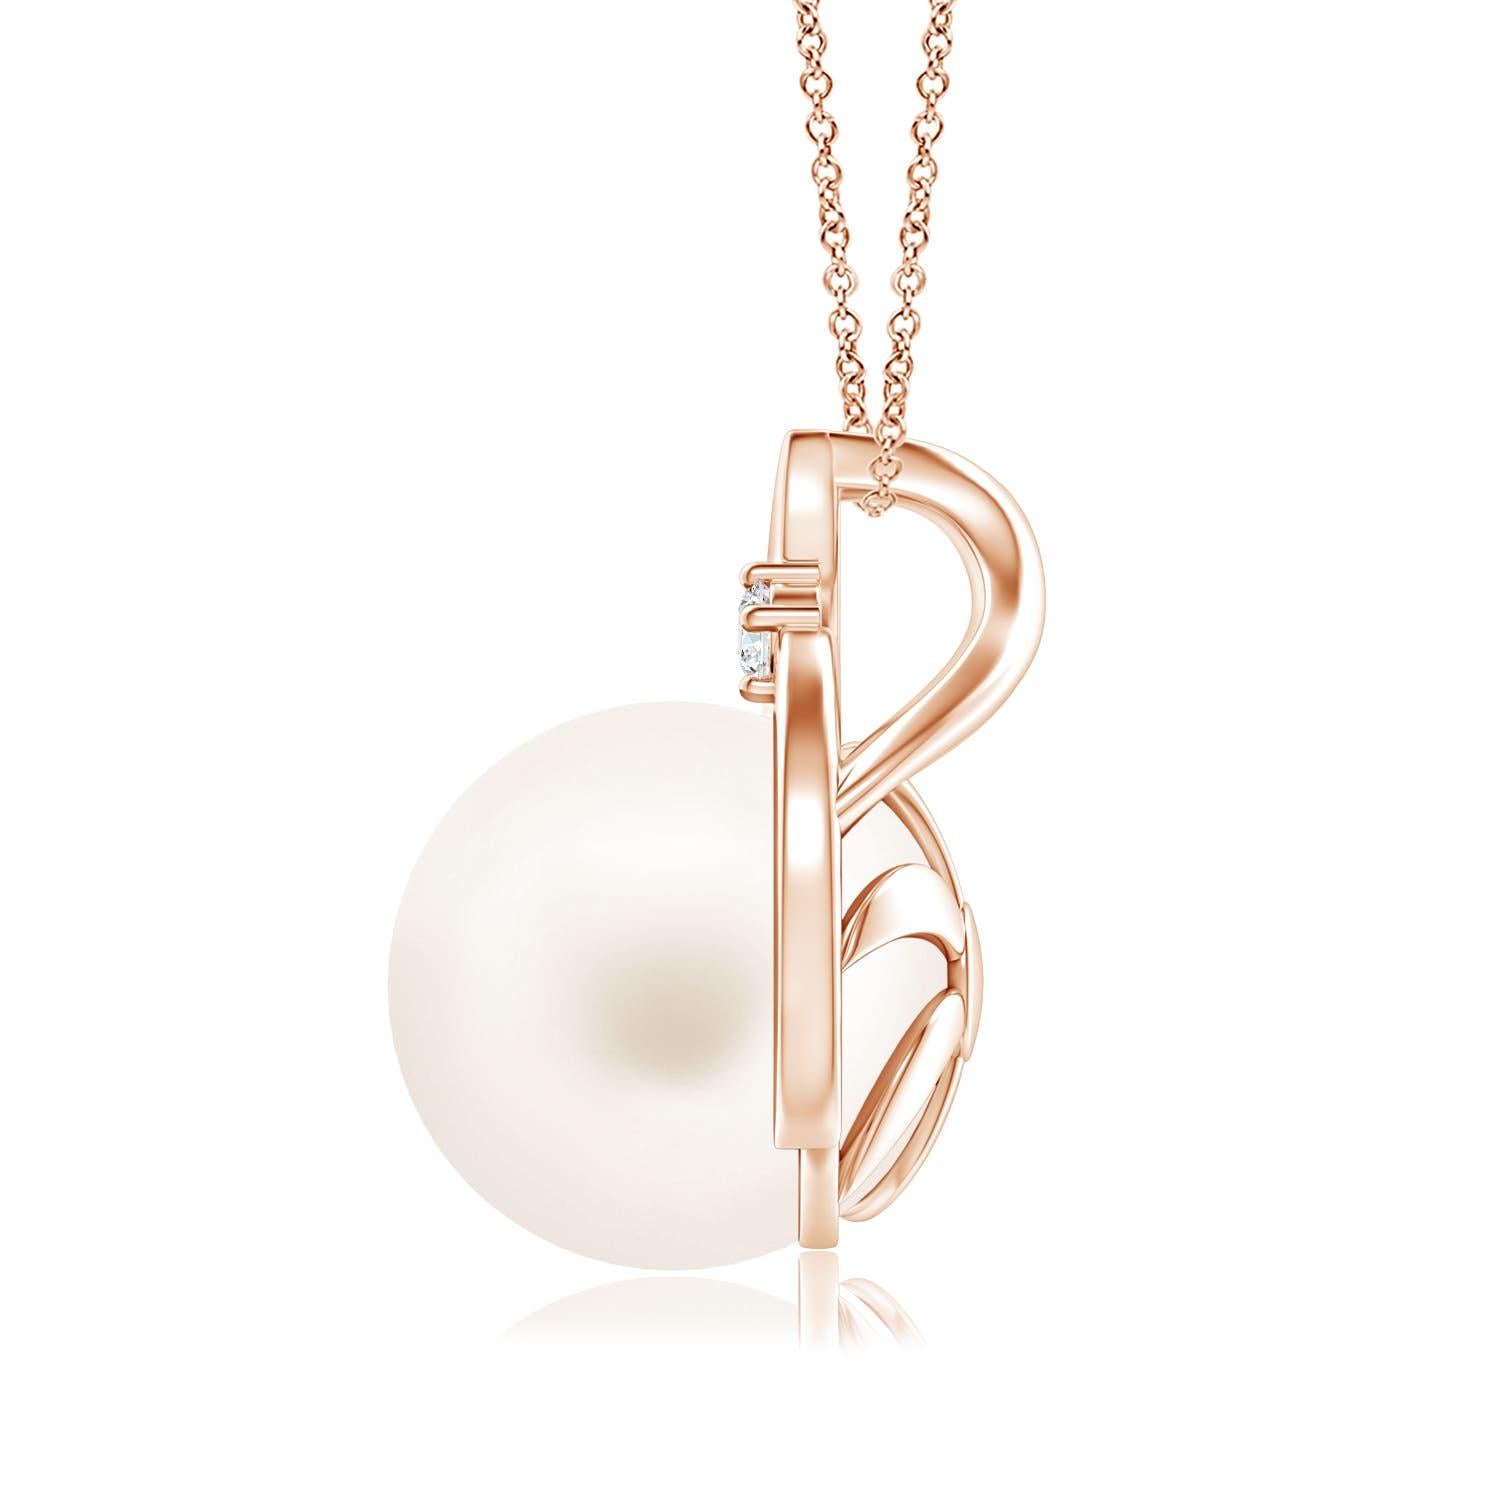 A modern take on the vintage wishbone pattern, this pearl pendant necklace in 14K rose gold is designed to evoke an old-world charm. The intricately set Freshwater cultured pearl looks breathtakingly beautiful. Uniquely designed bale lends a touch